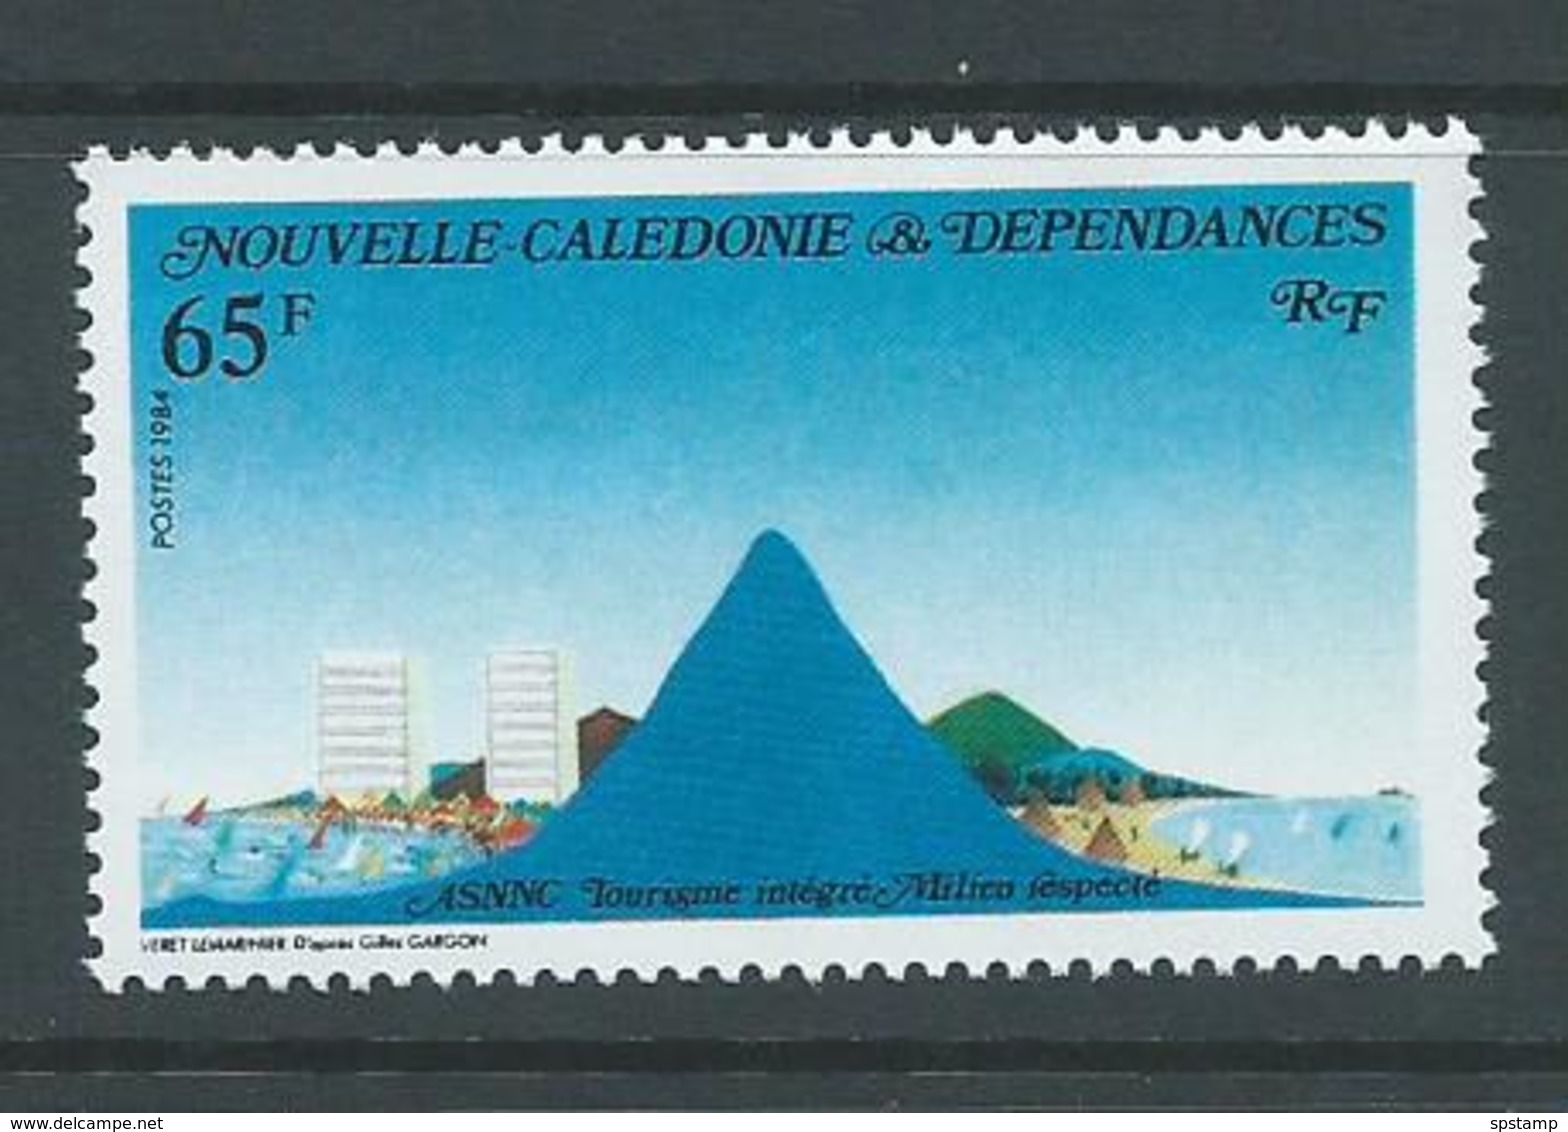 New Caledonia 1984 Environment  65 Fr Single MNH - Used Stamps